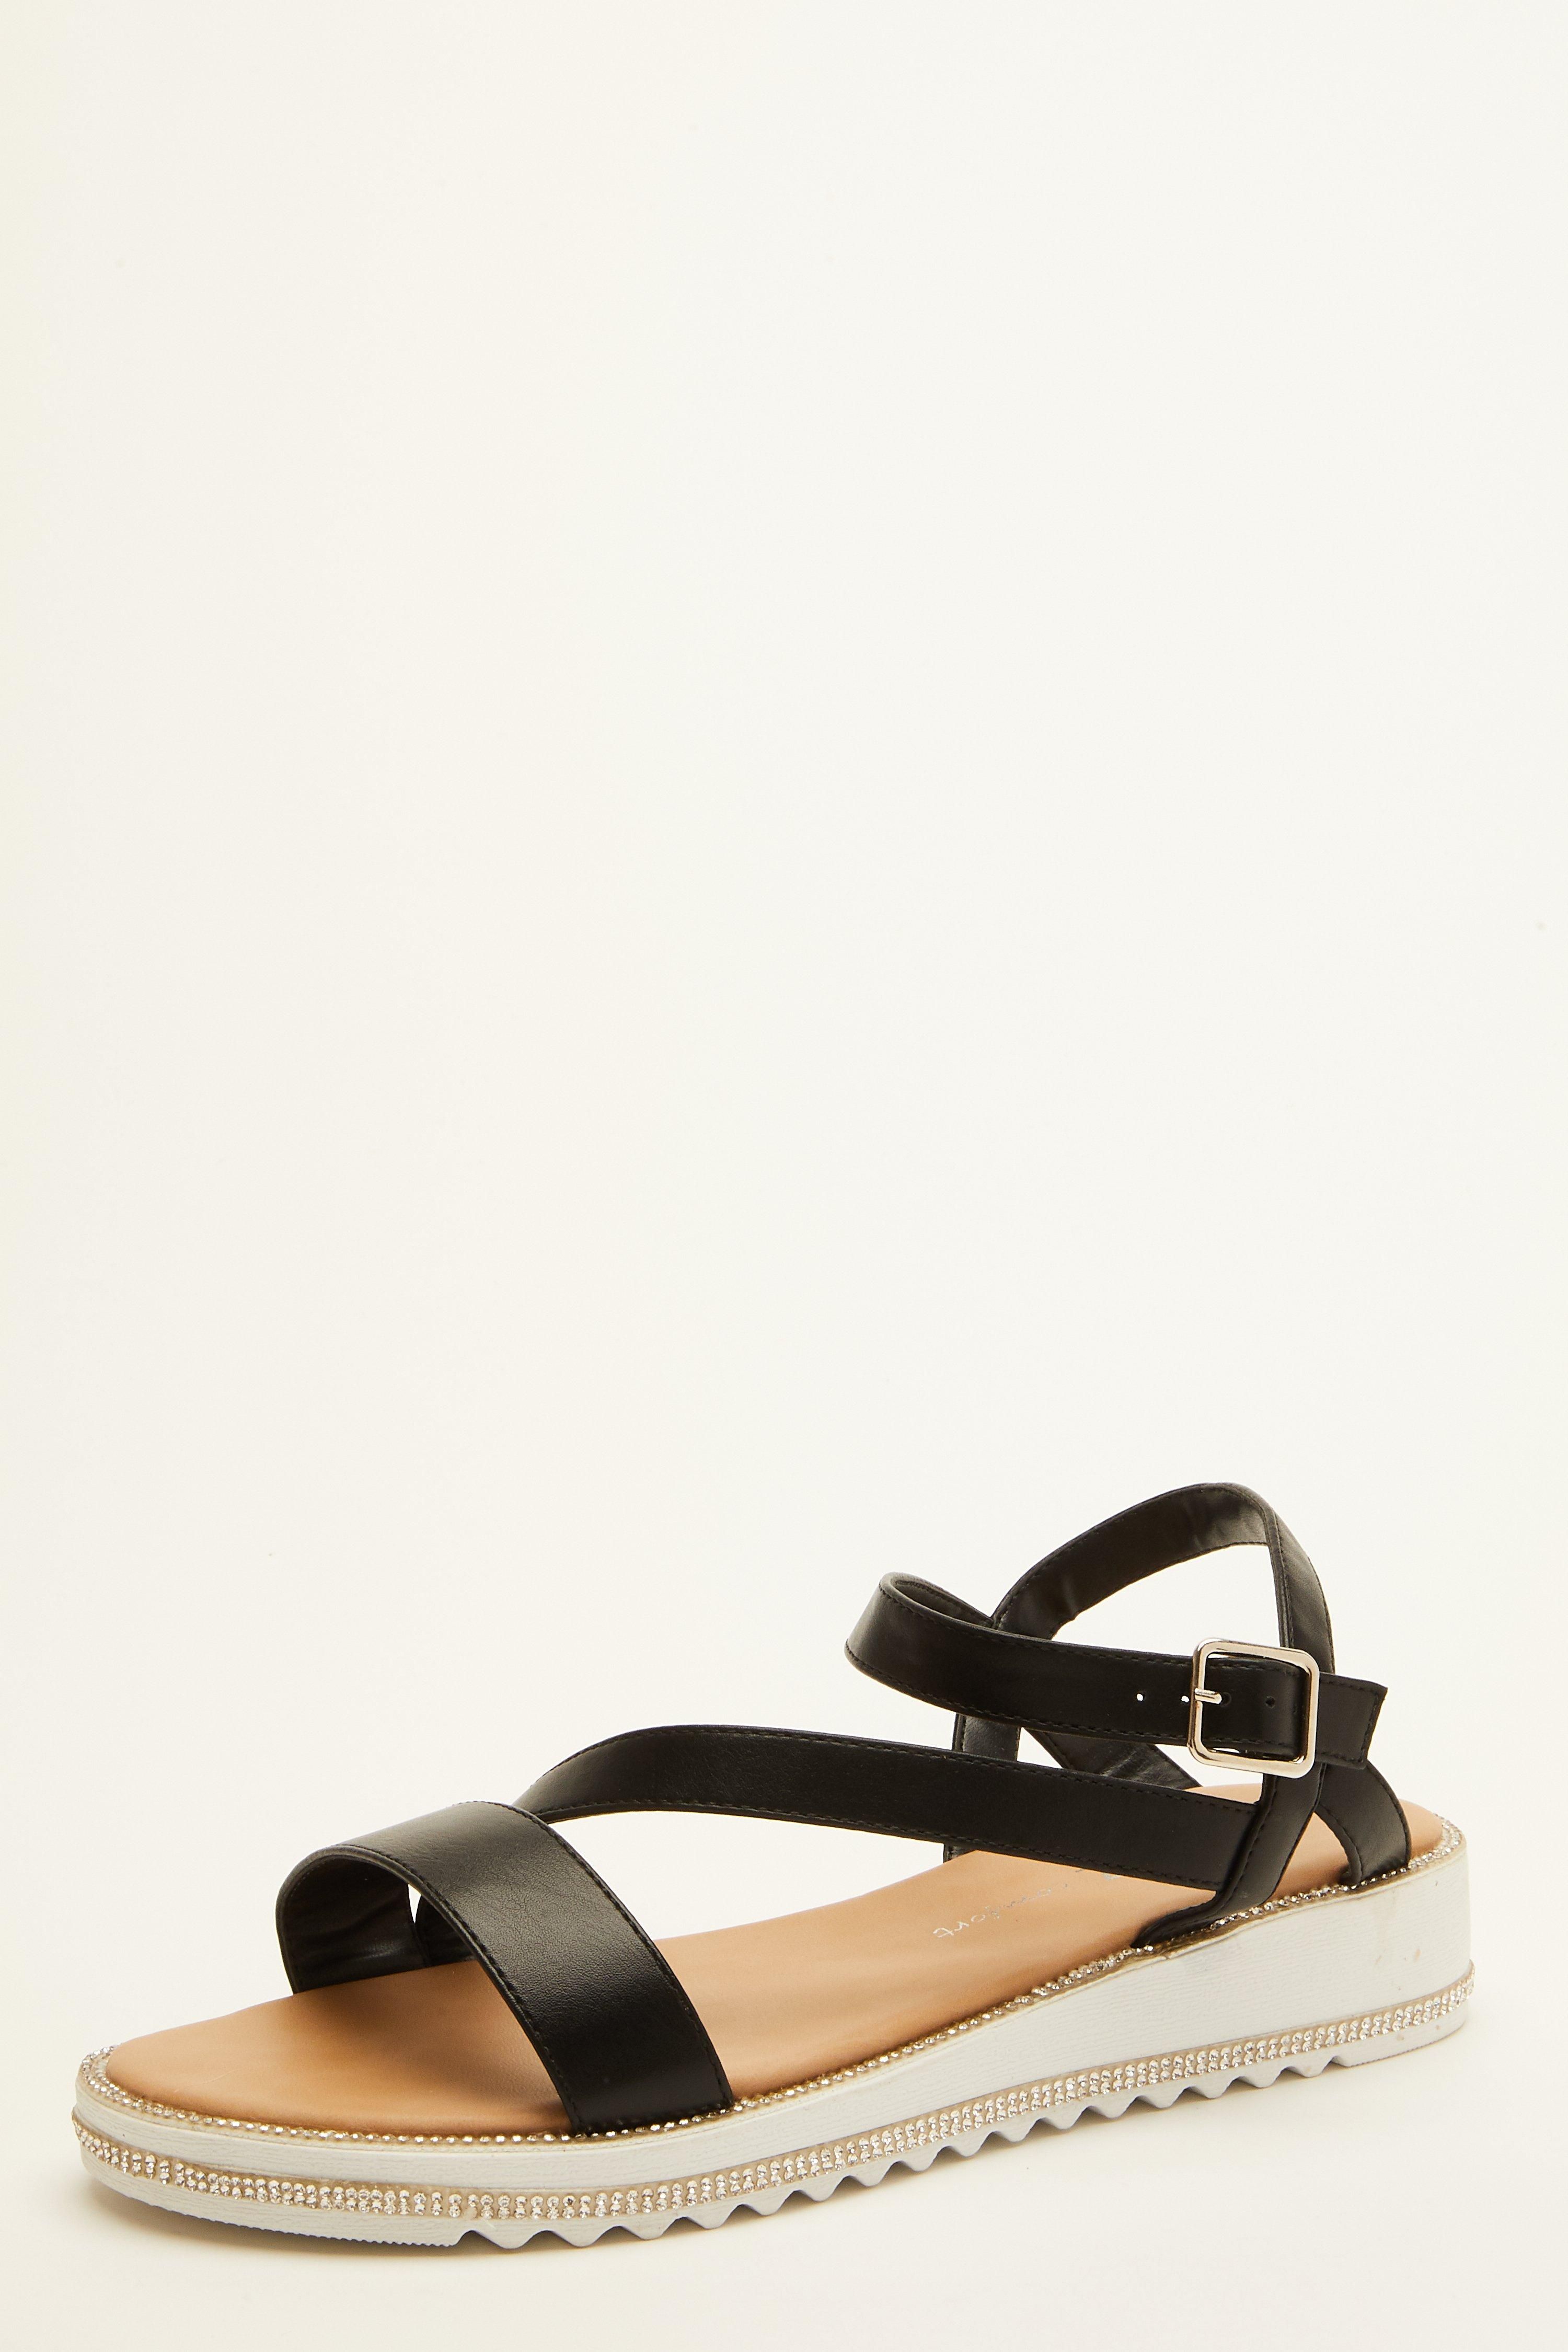 - Platform wedge  - Faux leather   - Asymmetric straps   - Embellished sole   - Heel height: 1.5